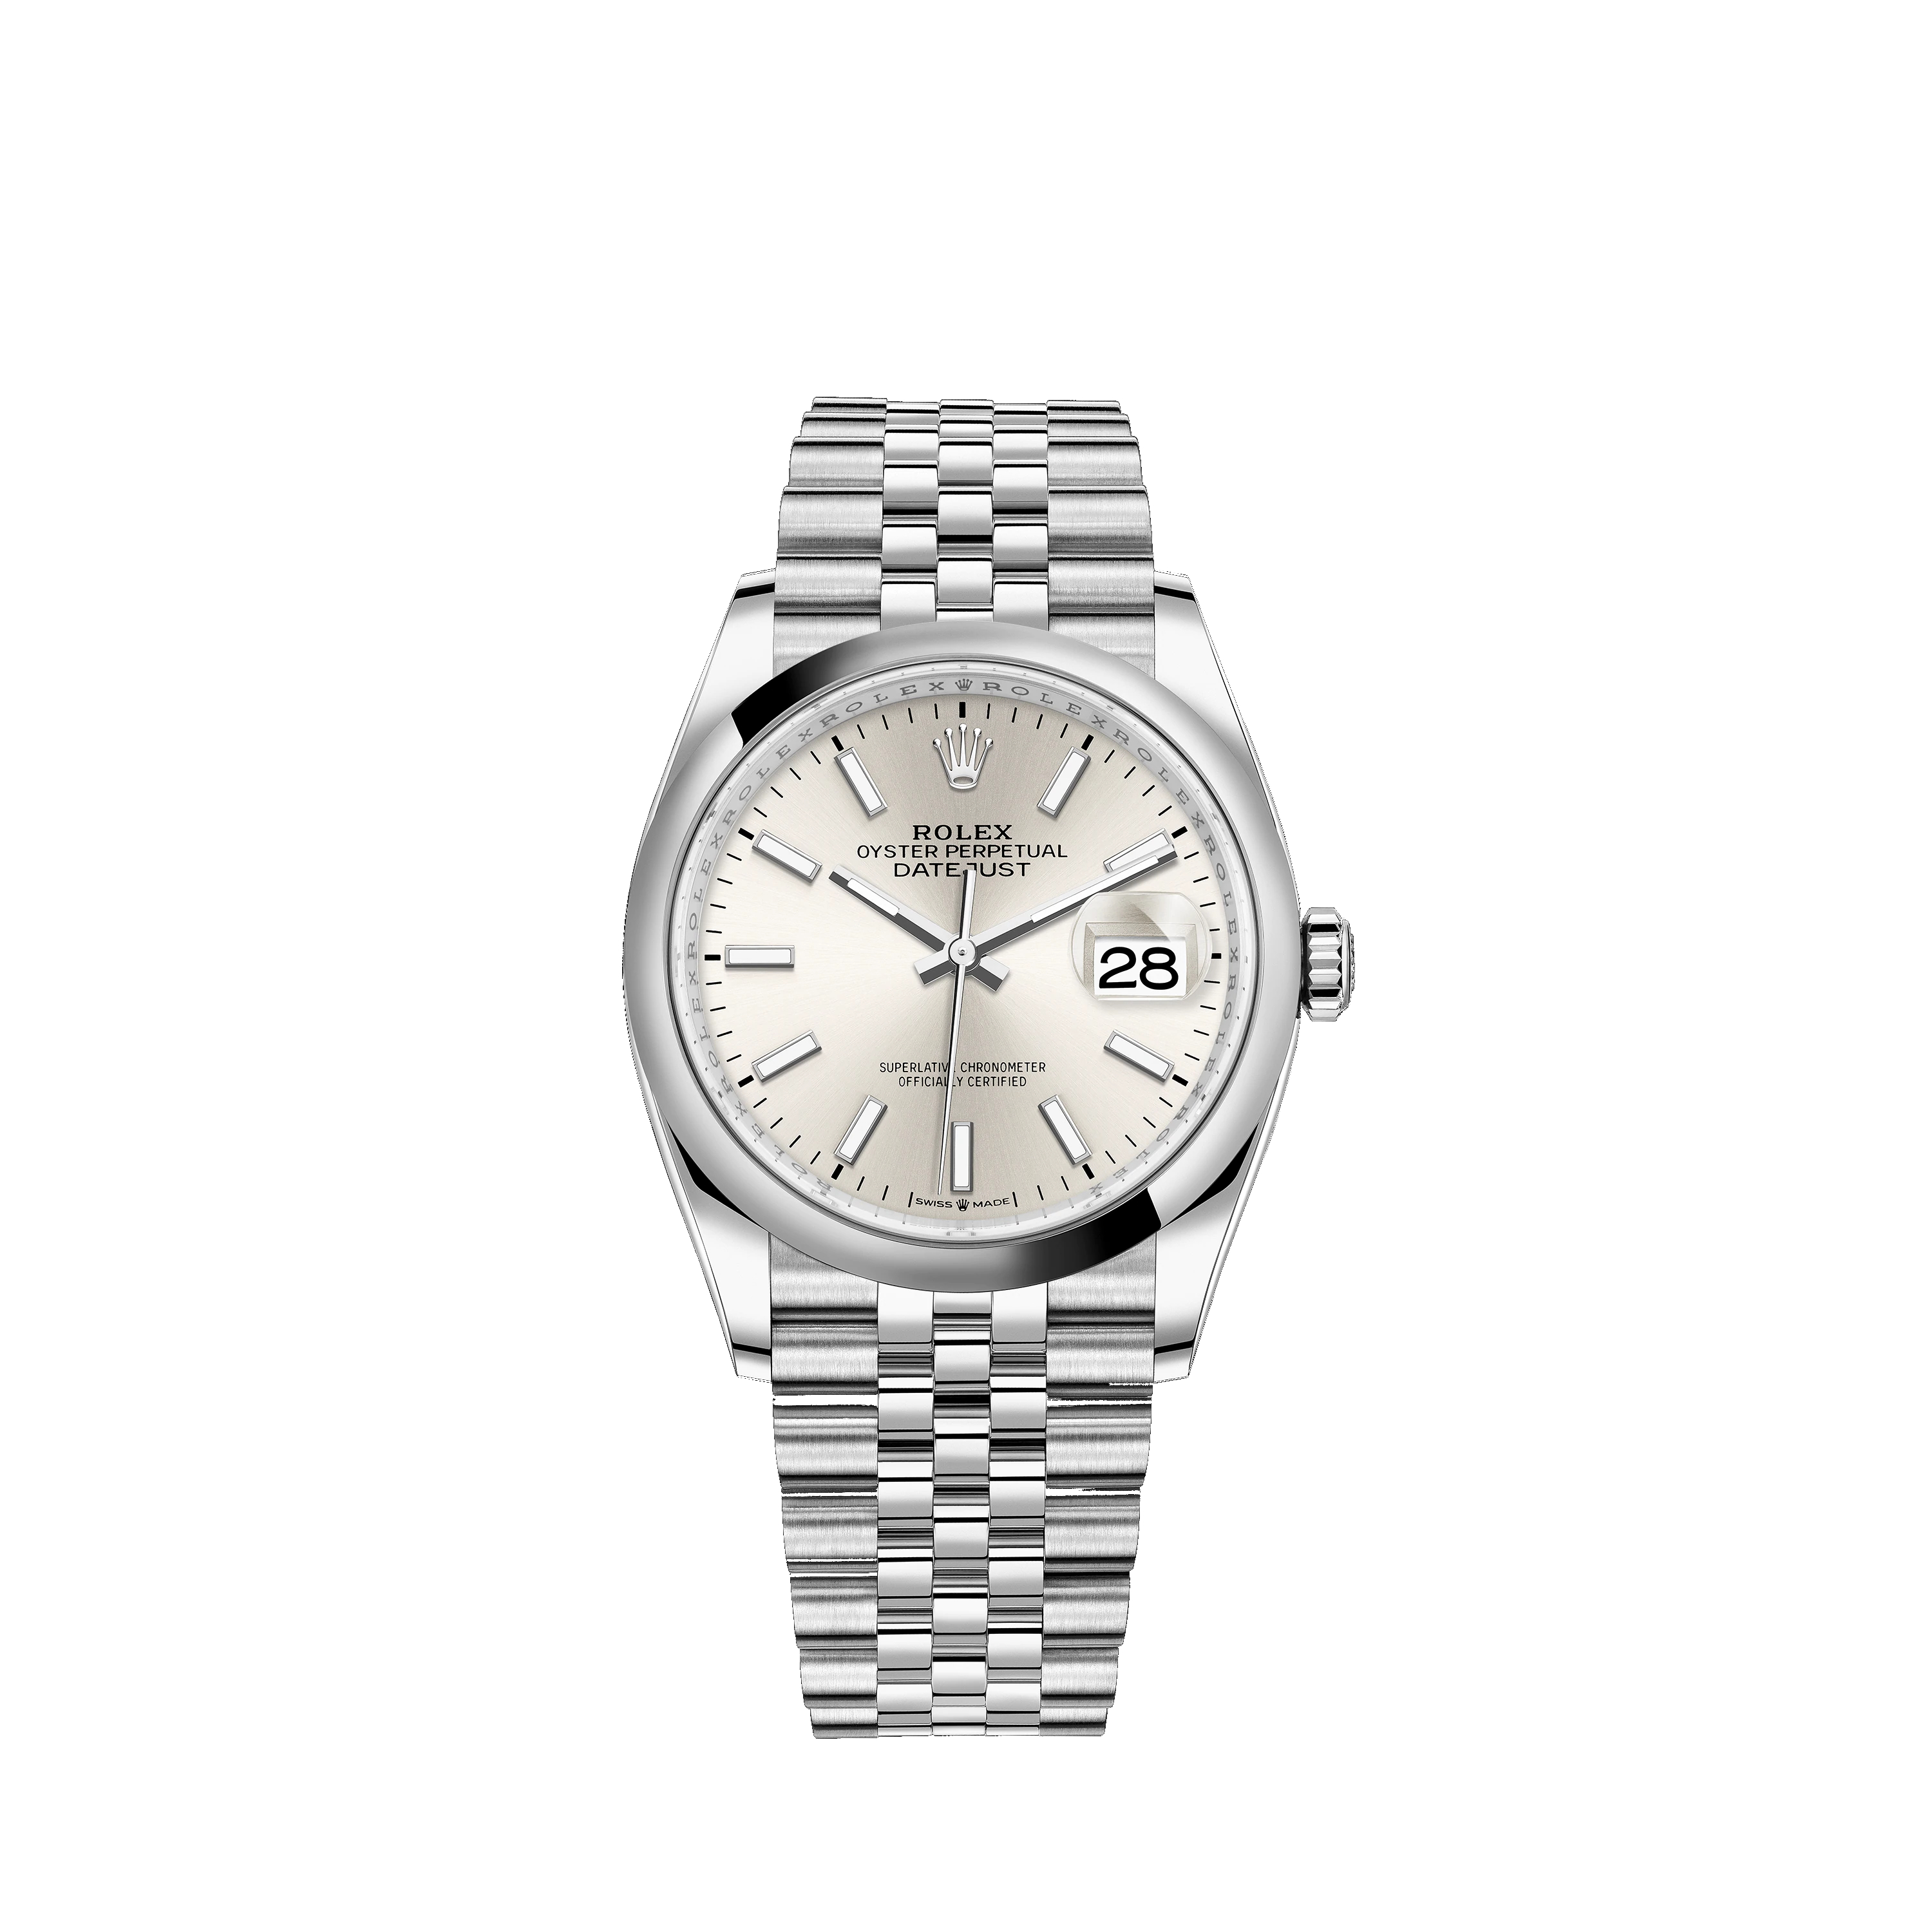 Datejust 36 126200 Stainless Steel Watch (Silver)